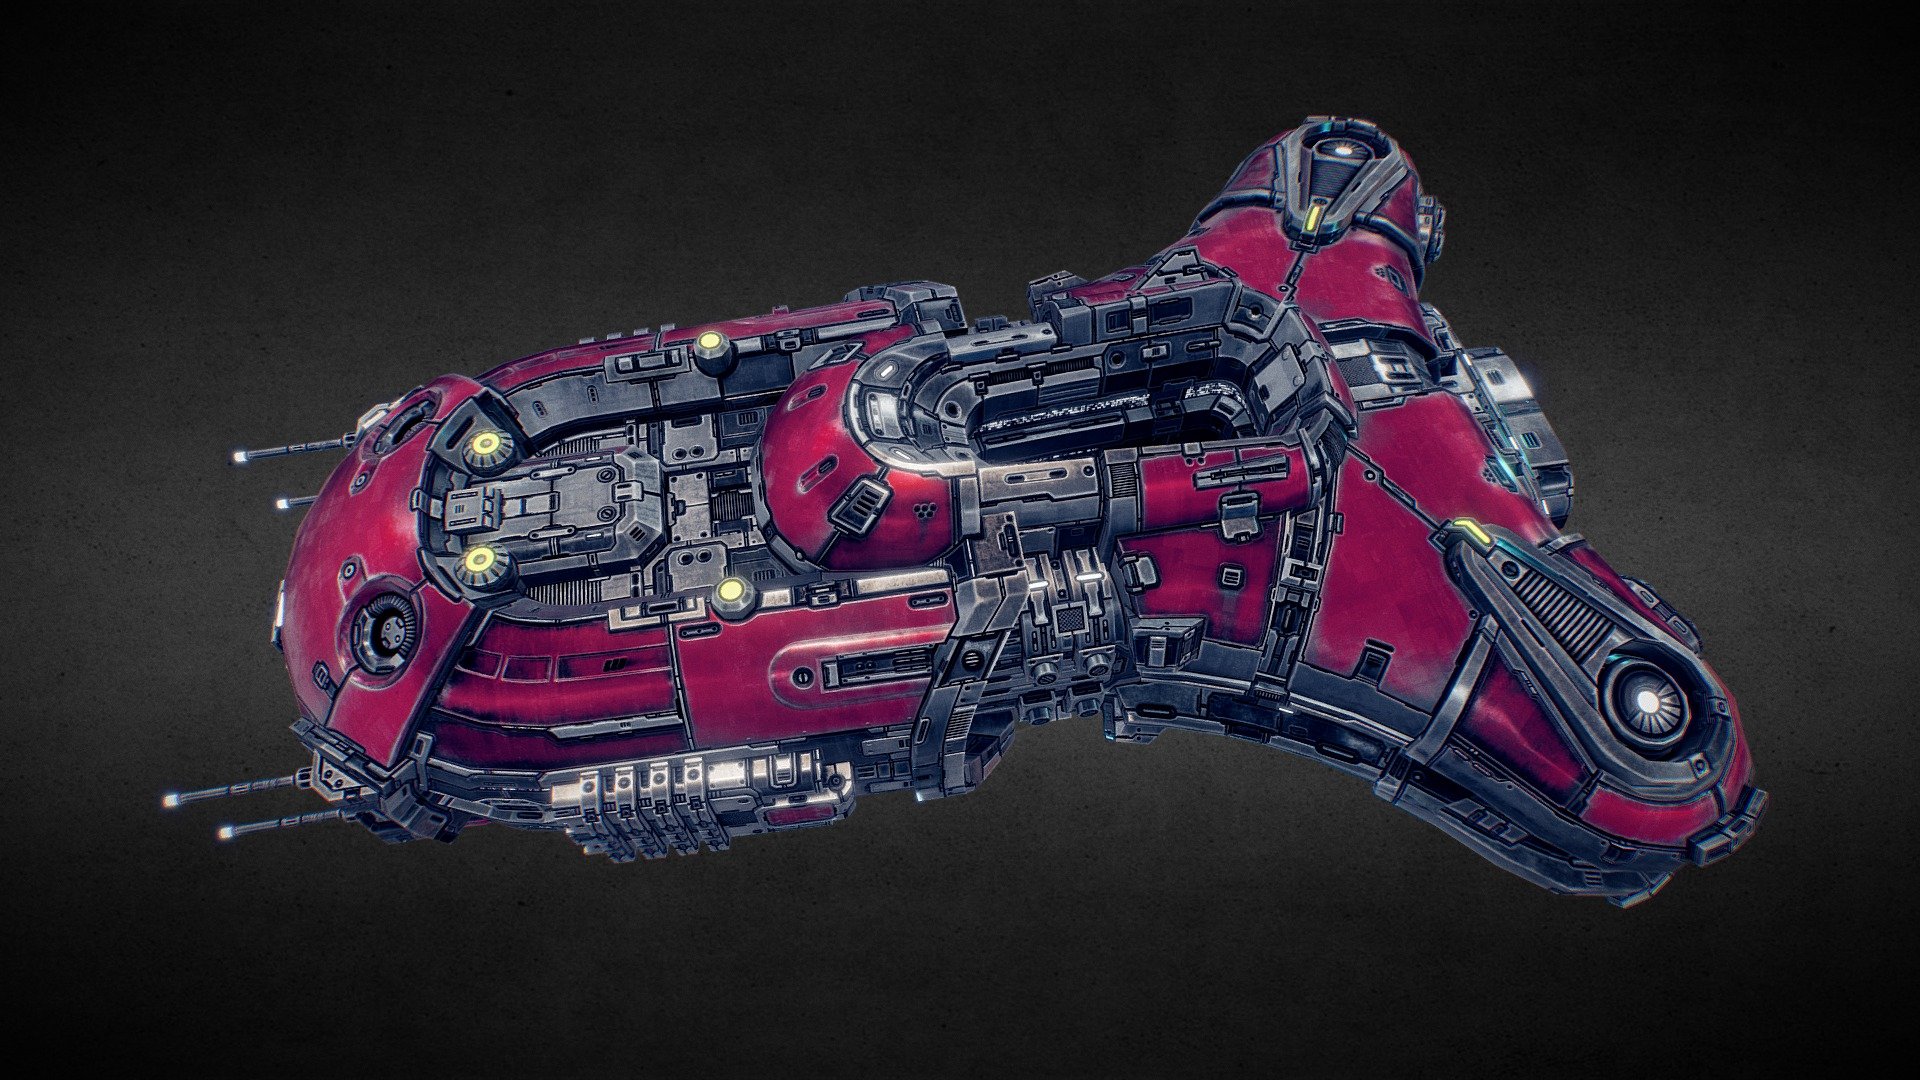 In-game model of a medium spaceship belonging to the Vanguard faction.
Learn more about the game at http://starfalltactics.com/ - Starfall Tactics — Ichaival Vanguard battleship - 3D model by Snowforged Entertainment (@snowforged) 3d model